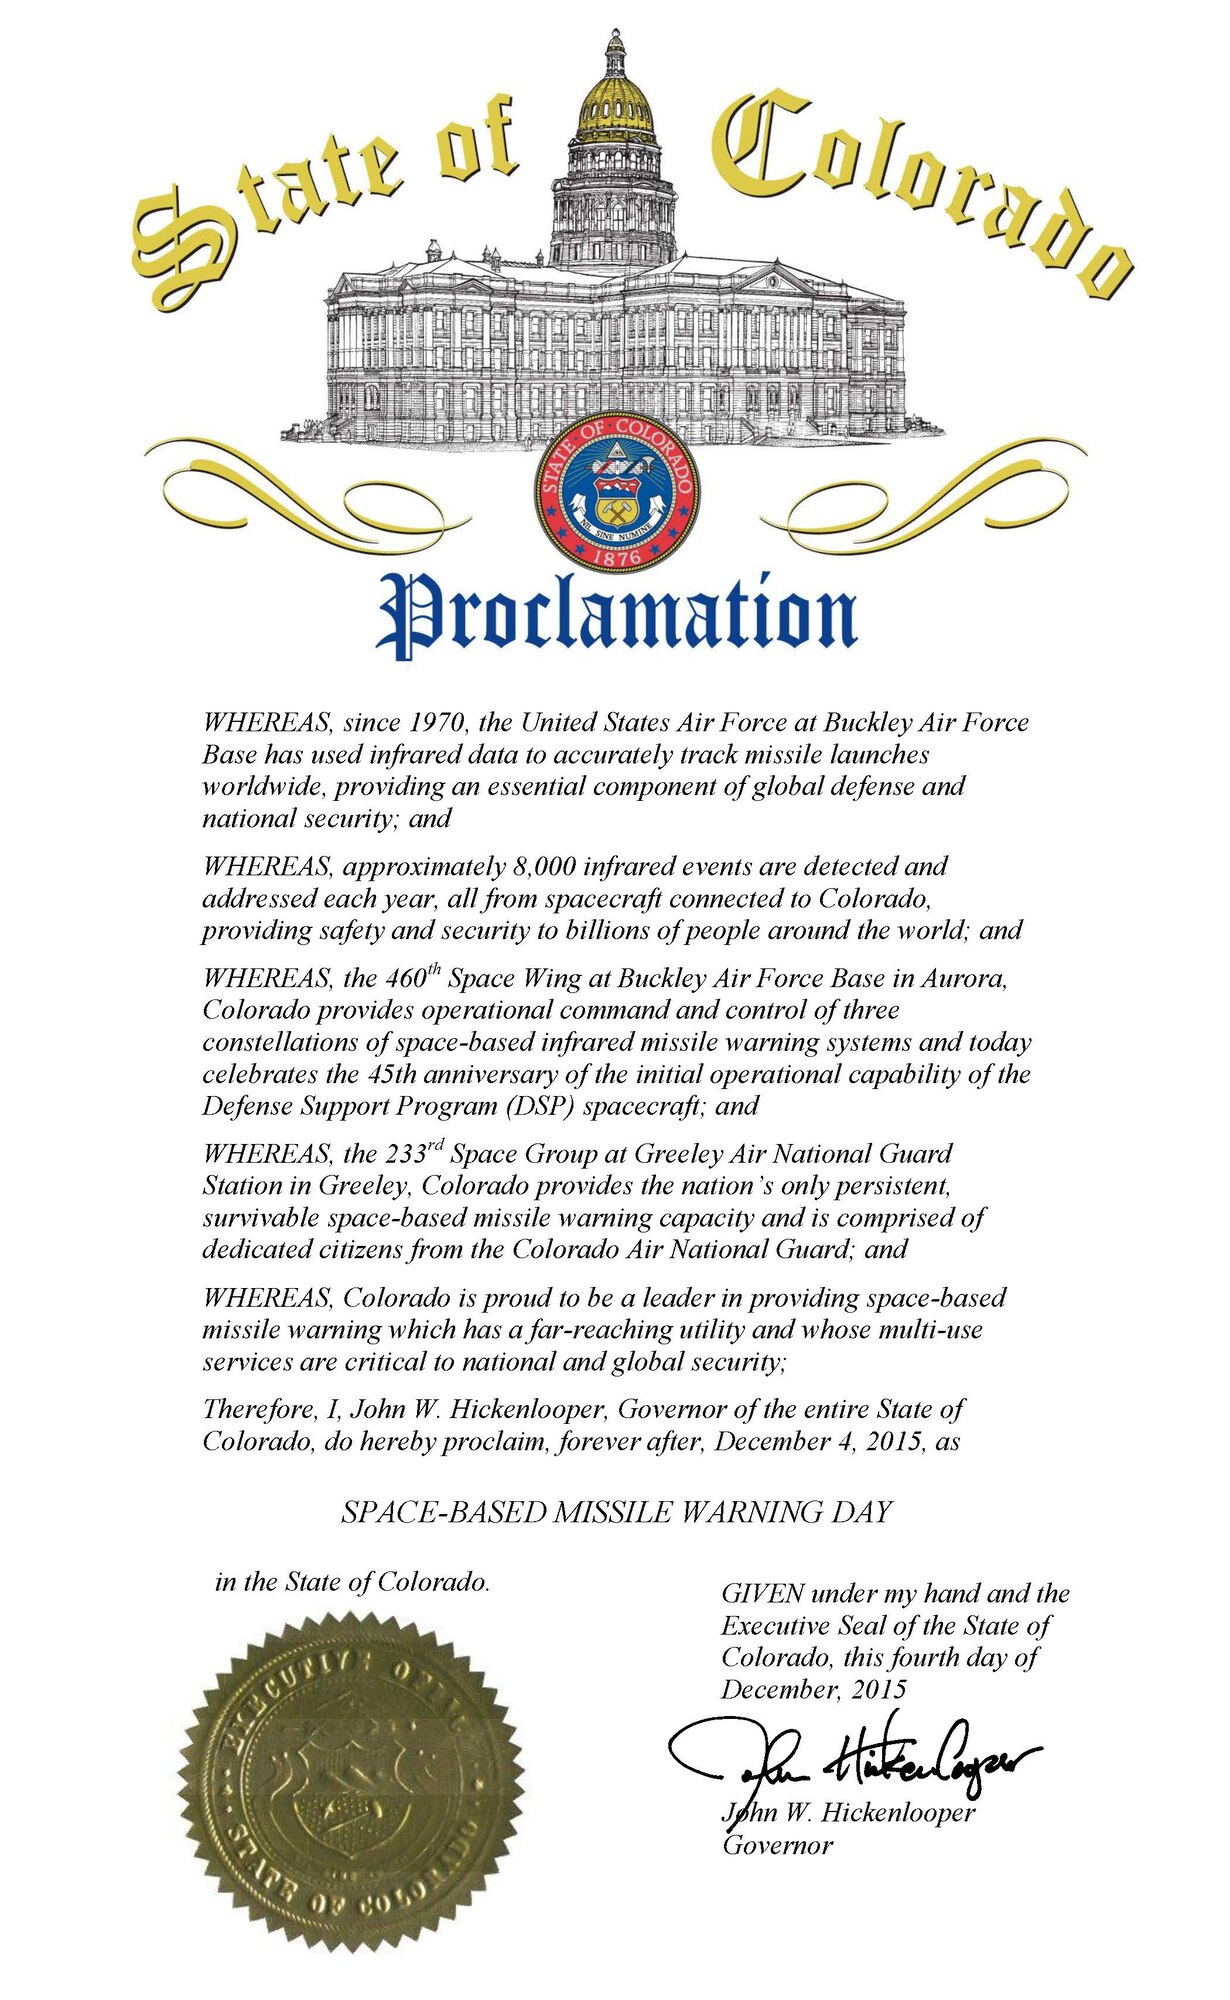 Space-Based Missile Warning Day Proclamation